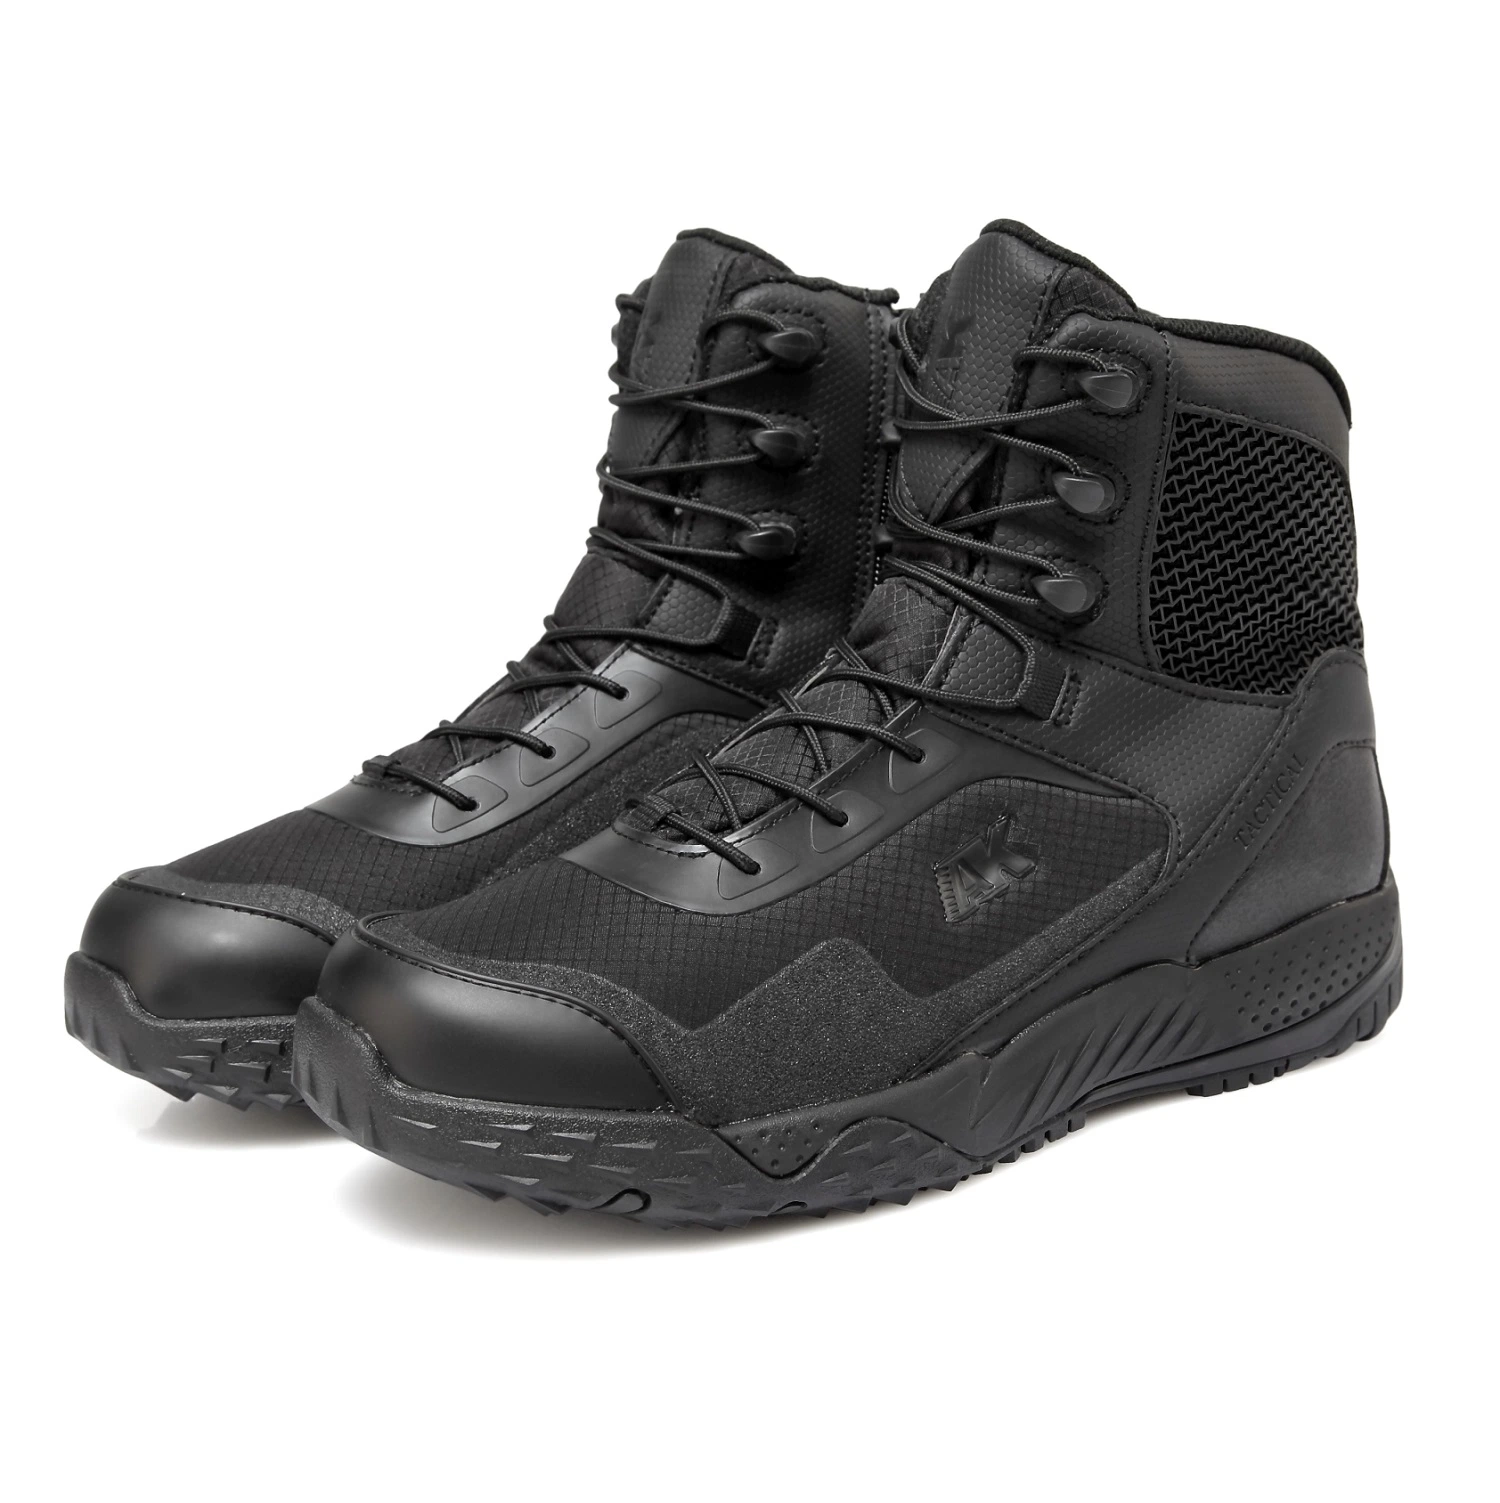 Black Tactical Boots with Light Weight and Breathable Material